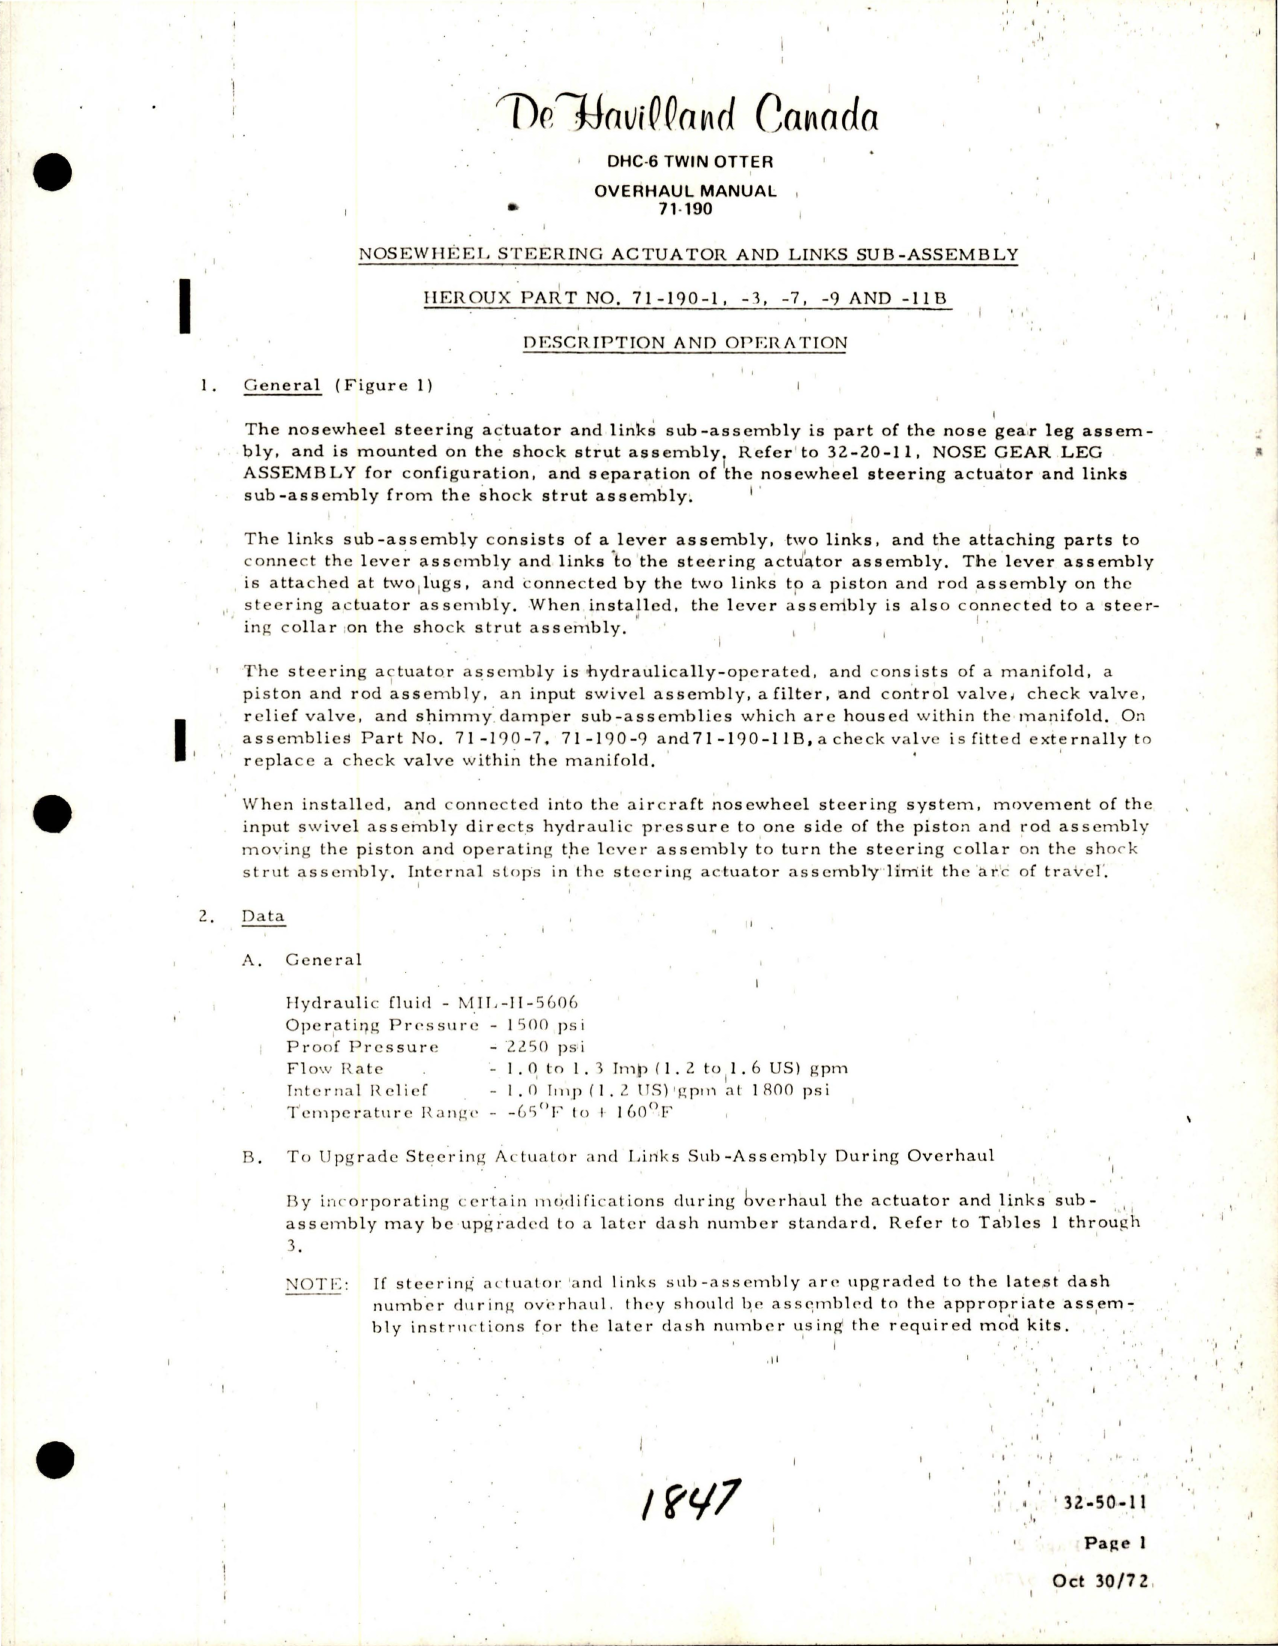 Sample page 7 from AirCorps Library document: Overhaul Manual for DHC-6 Twin Otter Nosewheel Steering Actuator and Links Sub Assembly - Part 71-190 